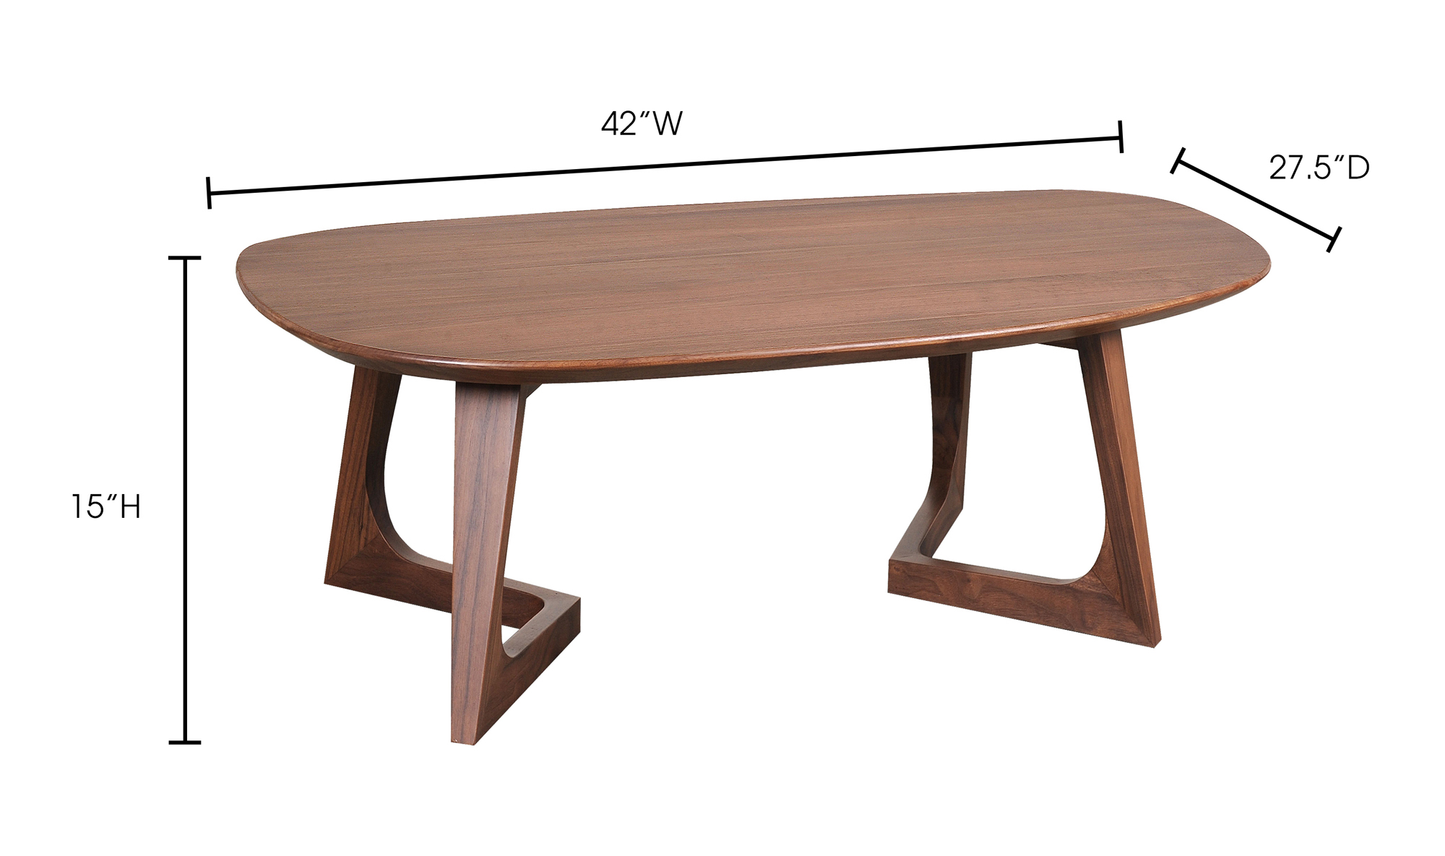 Godenza Coffee Table - Brown